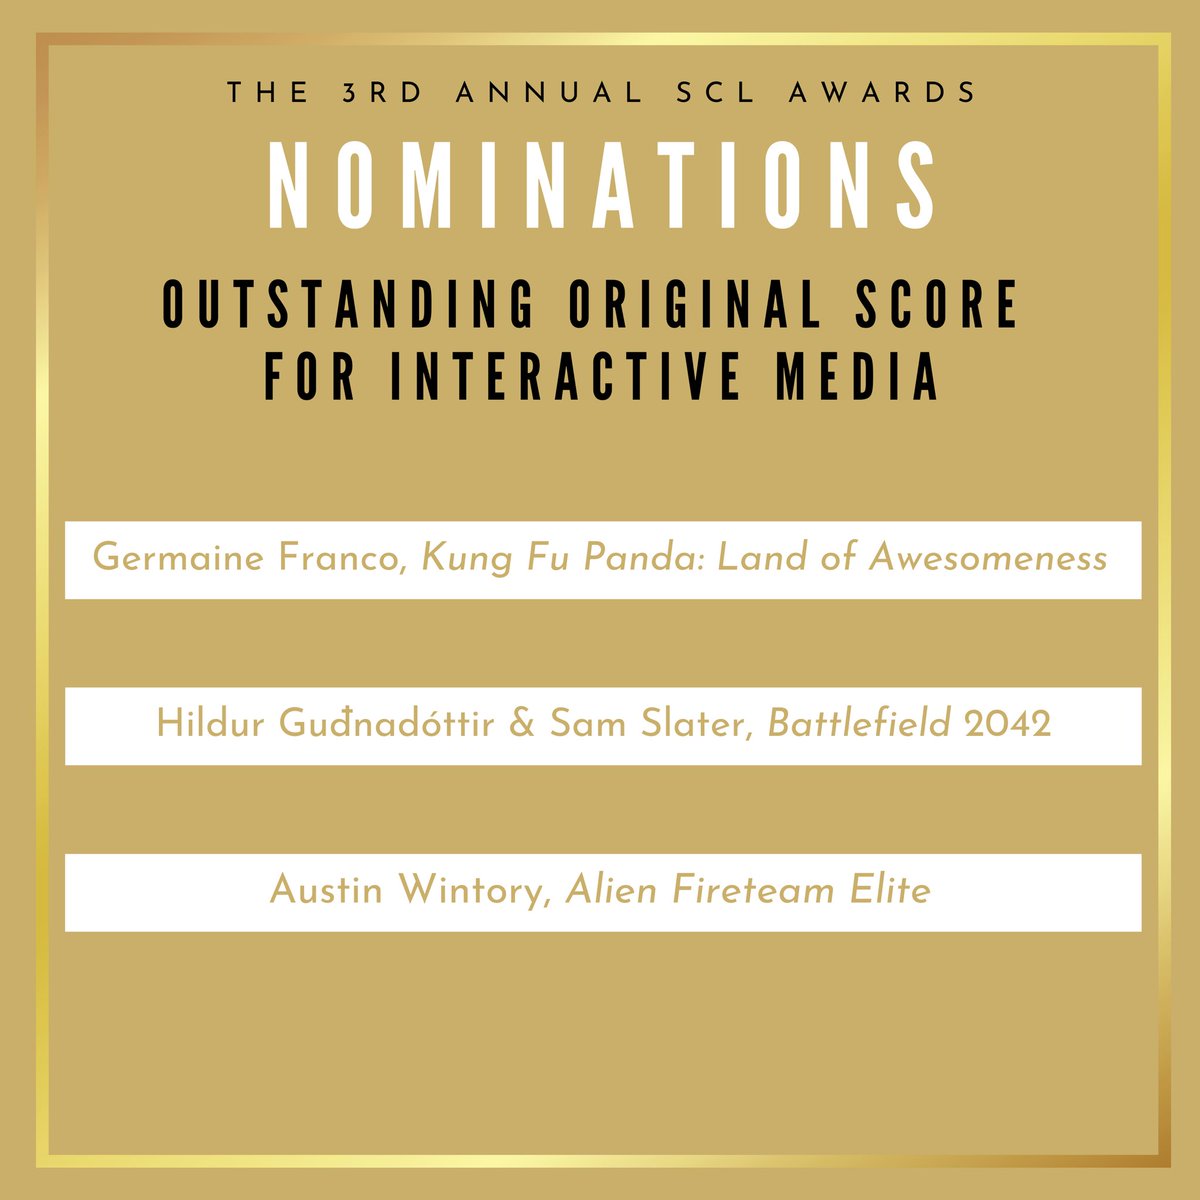 Congratulations to the nominees for Outstanding Original Score for Interactive Media! 🎶 #sclawards #originalscore #interactivemedia #thescl #sclny